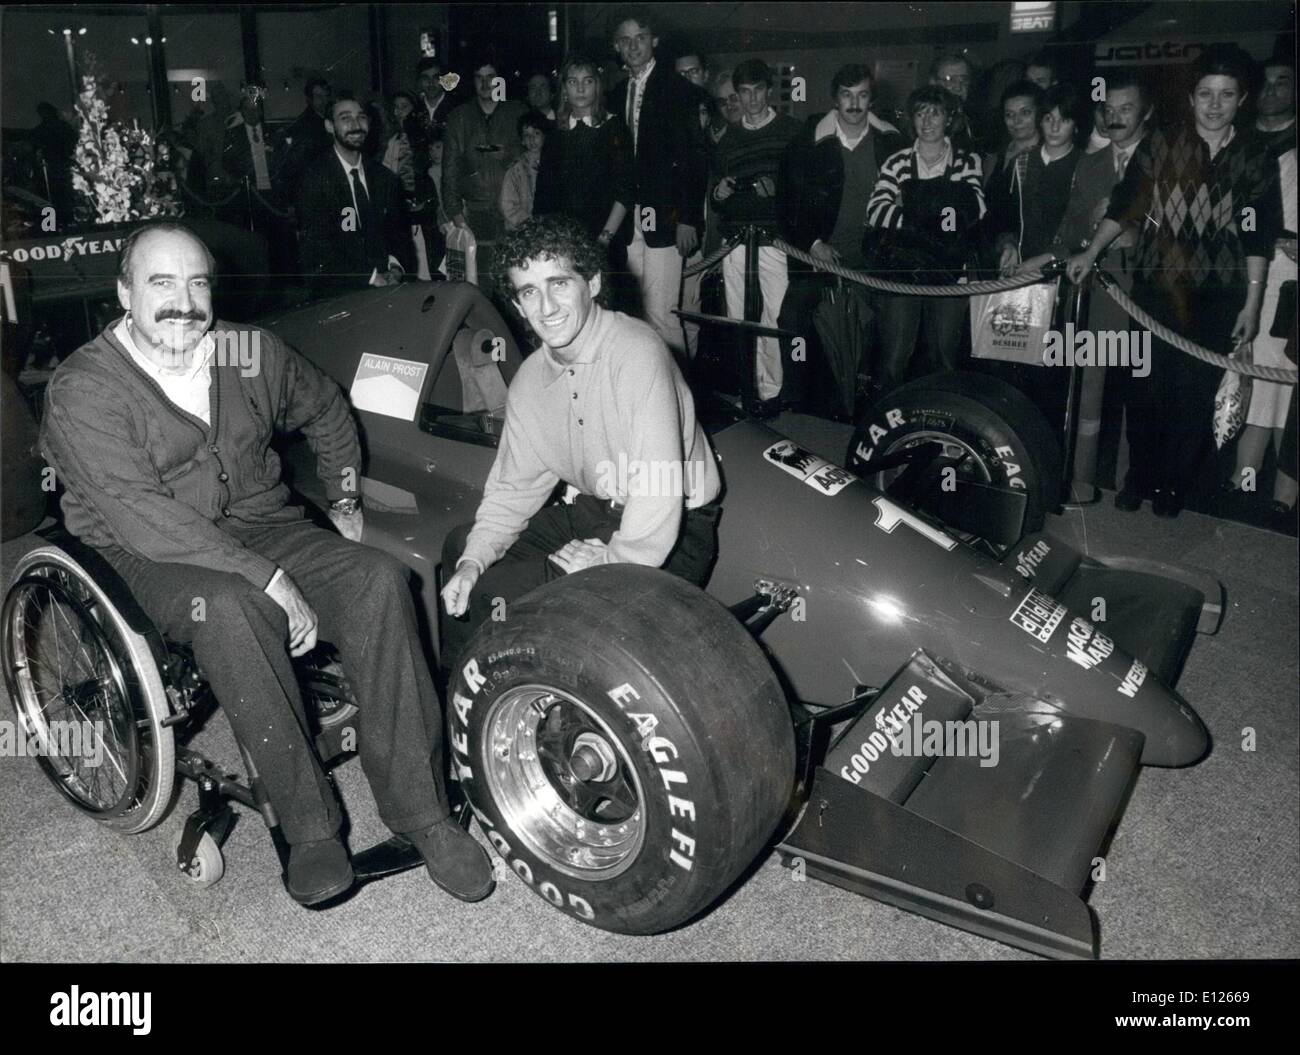 Nov. 11, 1989 - Prost, Regazzoni and Ferrari: Formula-One world champion French Alain Prost visited the racing-car exhibition ''Esposauto'' which was organized by former racing crack Swiss Clay Regazzoni. Photo shows Prost (right) sitting on a Ferrari racing car with the number 1 of the world champion, besides him Clay Regazzoni (left) Stock Photo